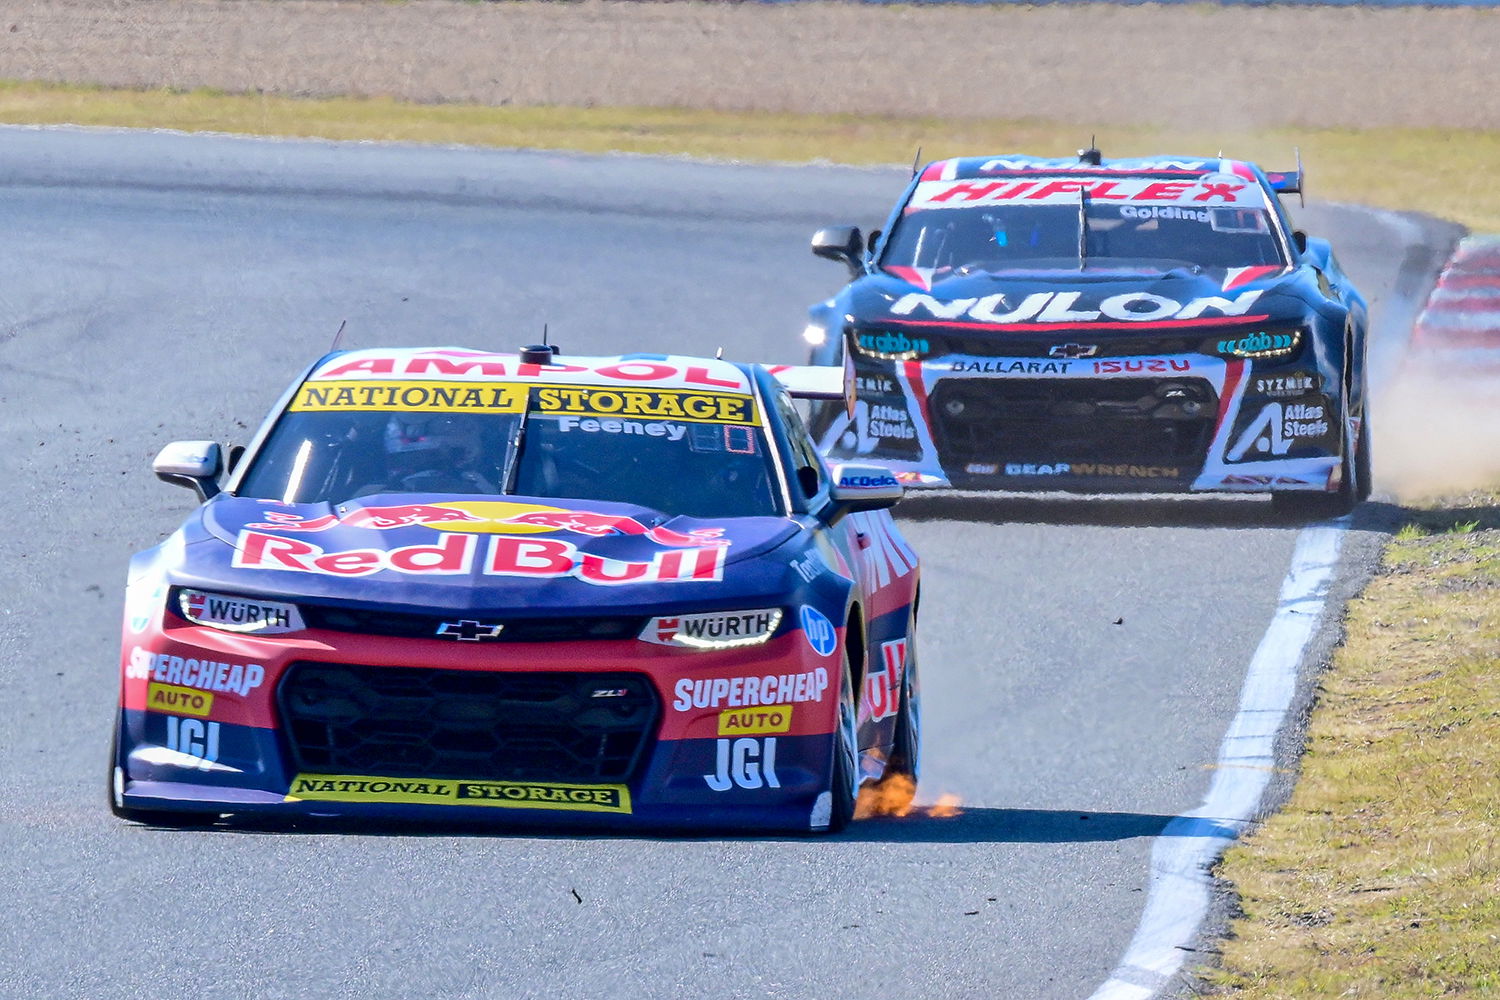 Gallery-Supercars-Championship-testing-Queensland-Raceway-13